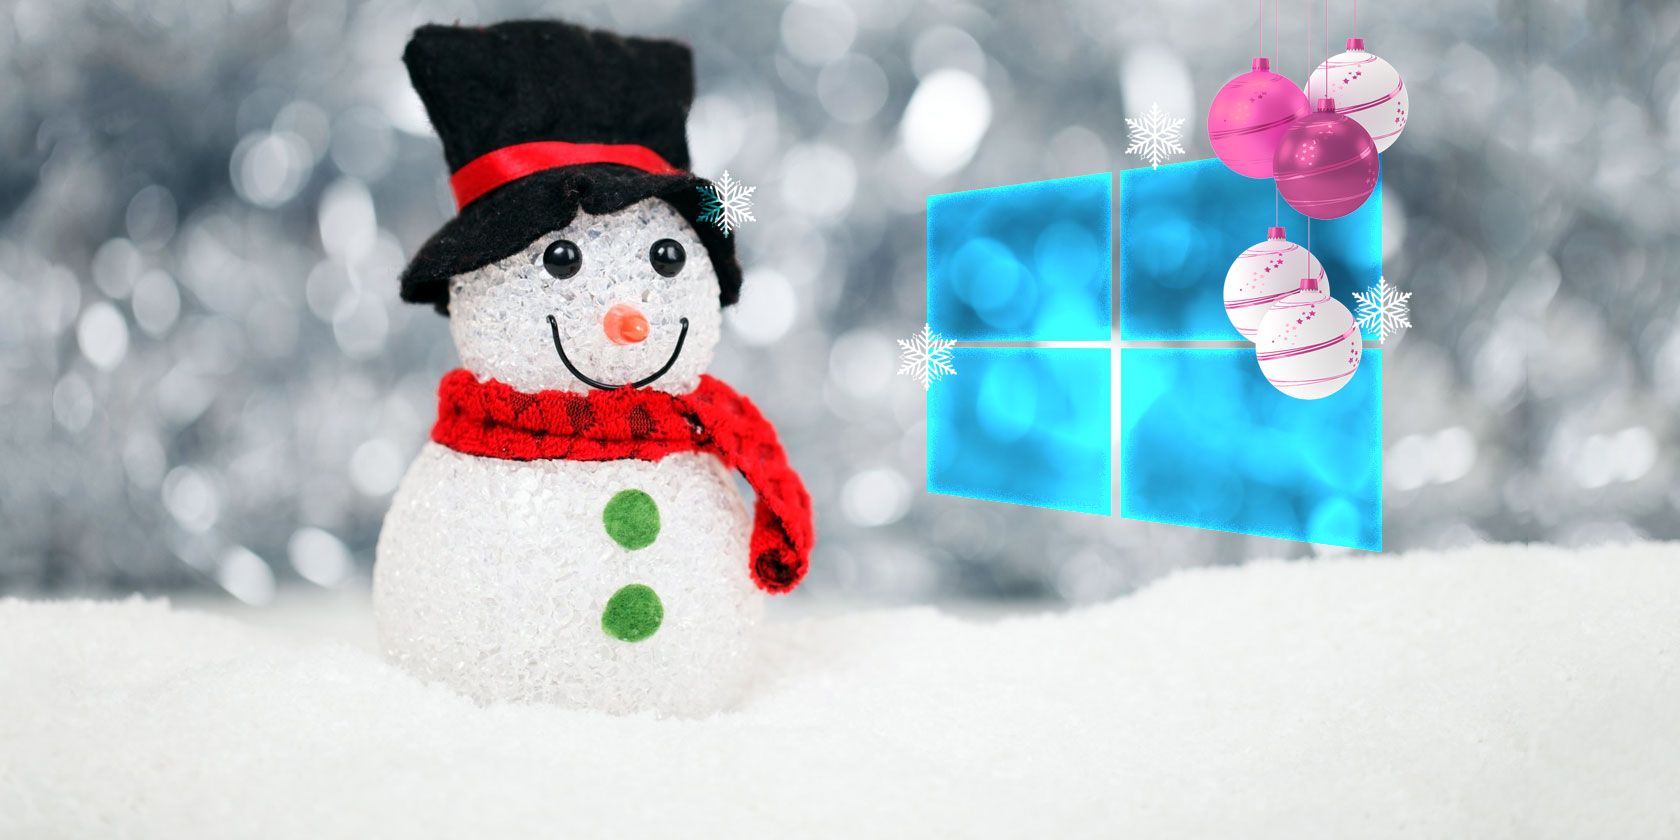 How to Add a Christmas Theme to Windows 10